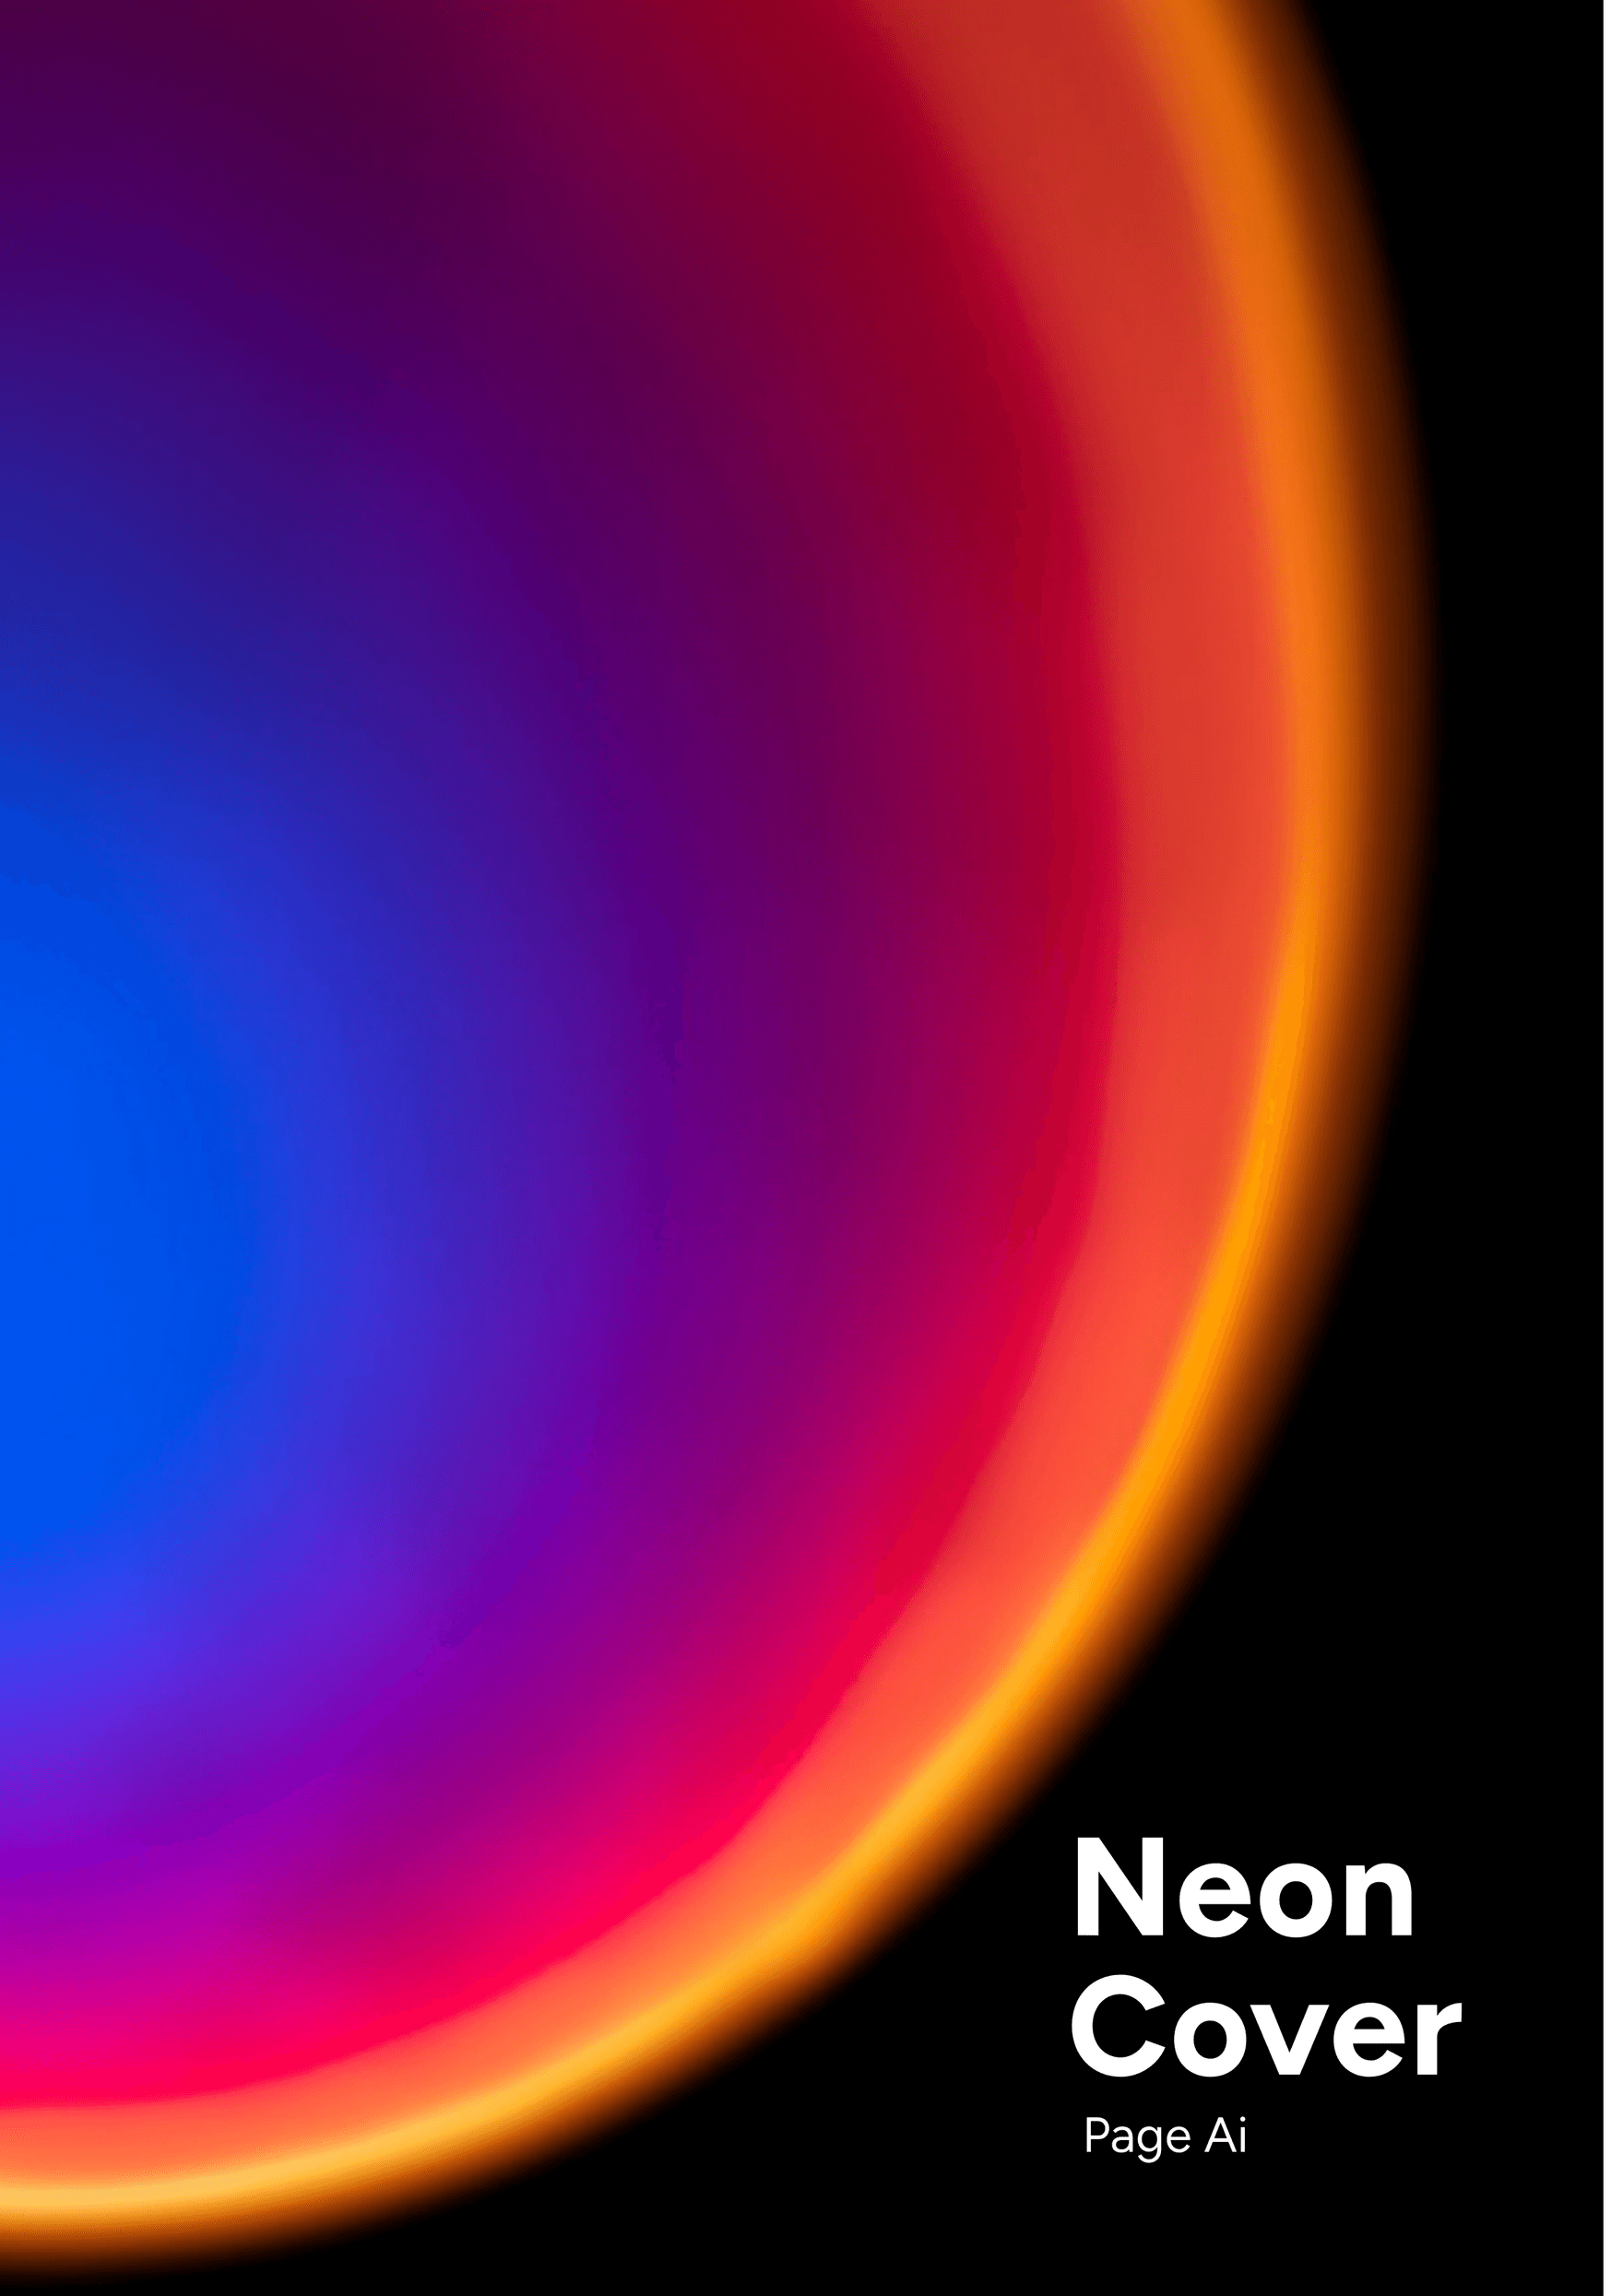 Neon Cover Page AI Template